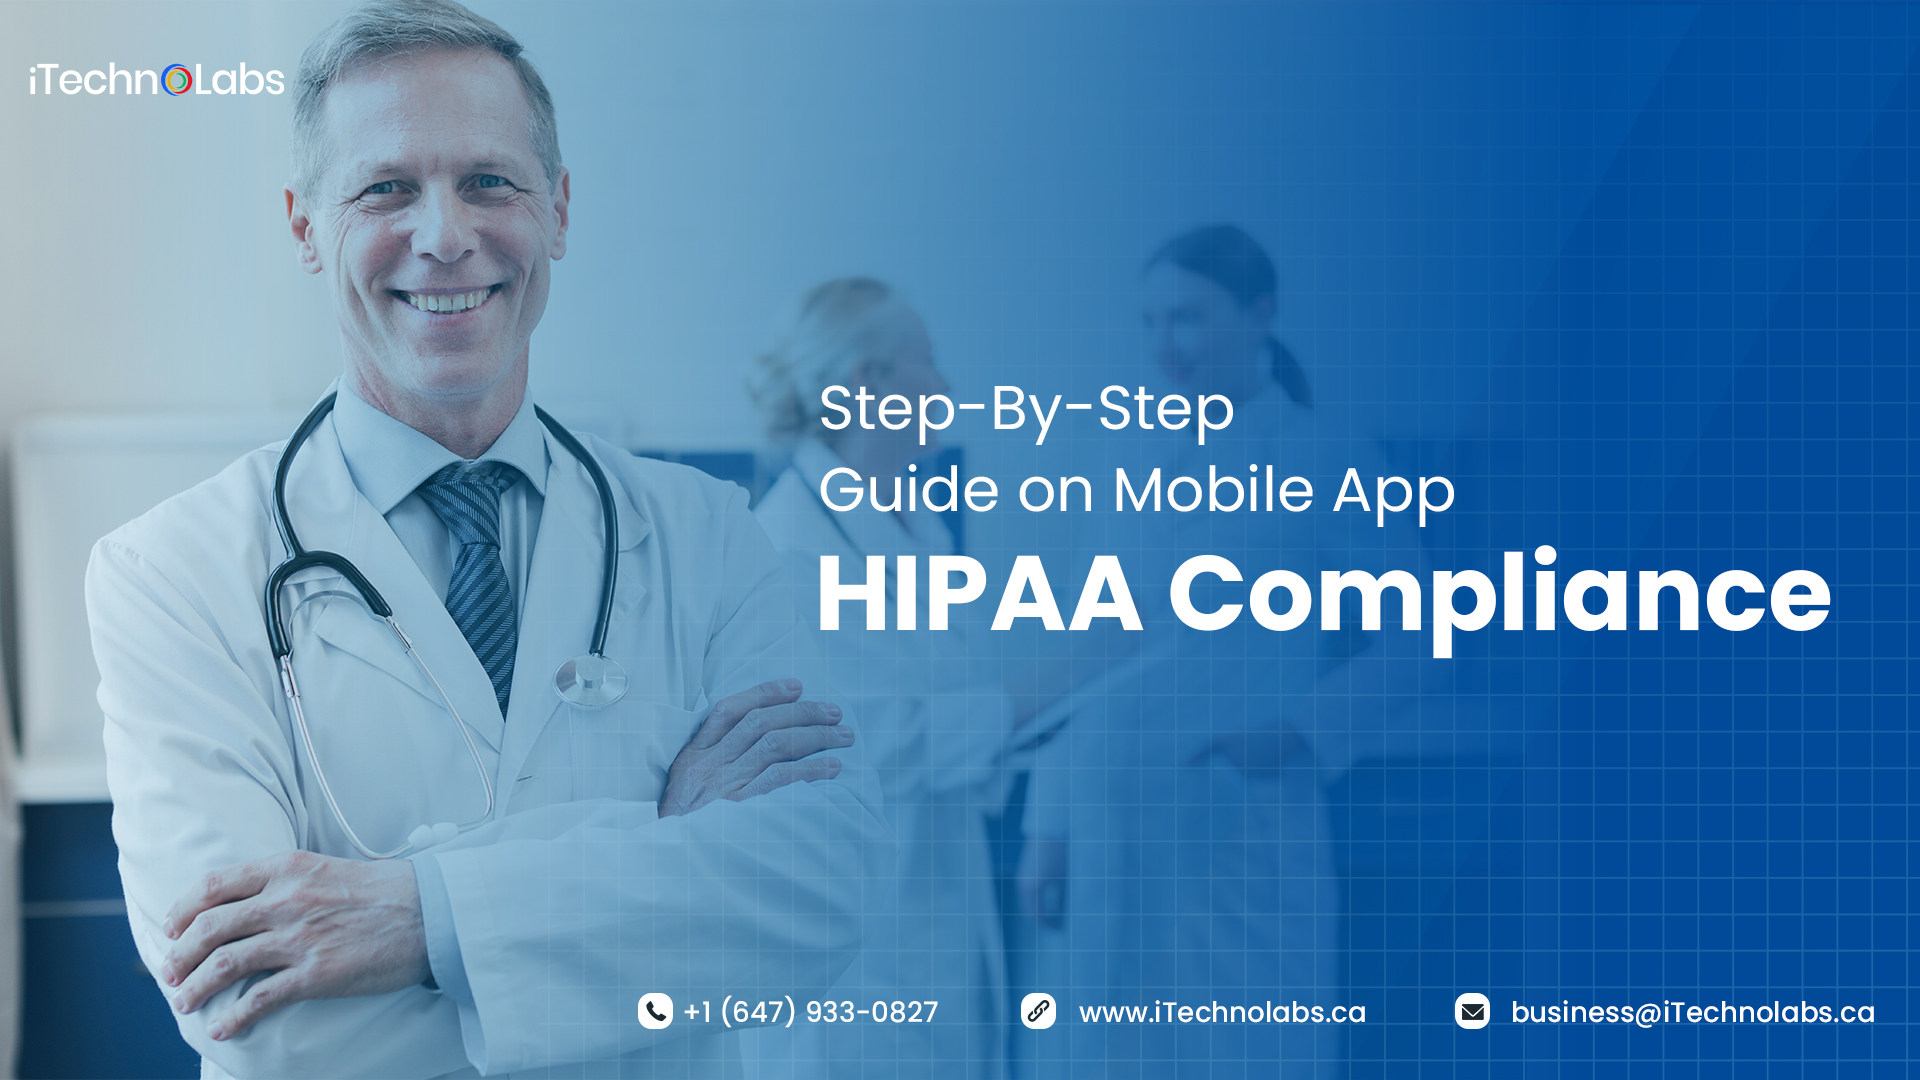 step-by-step guide on mobile app hipaa compliance itechnolabs